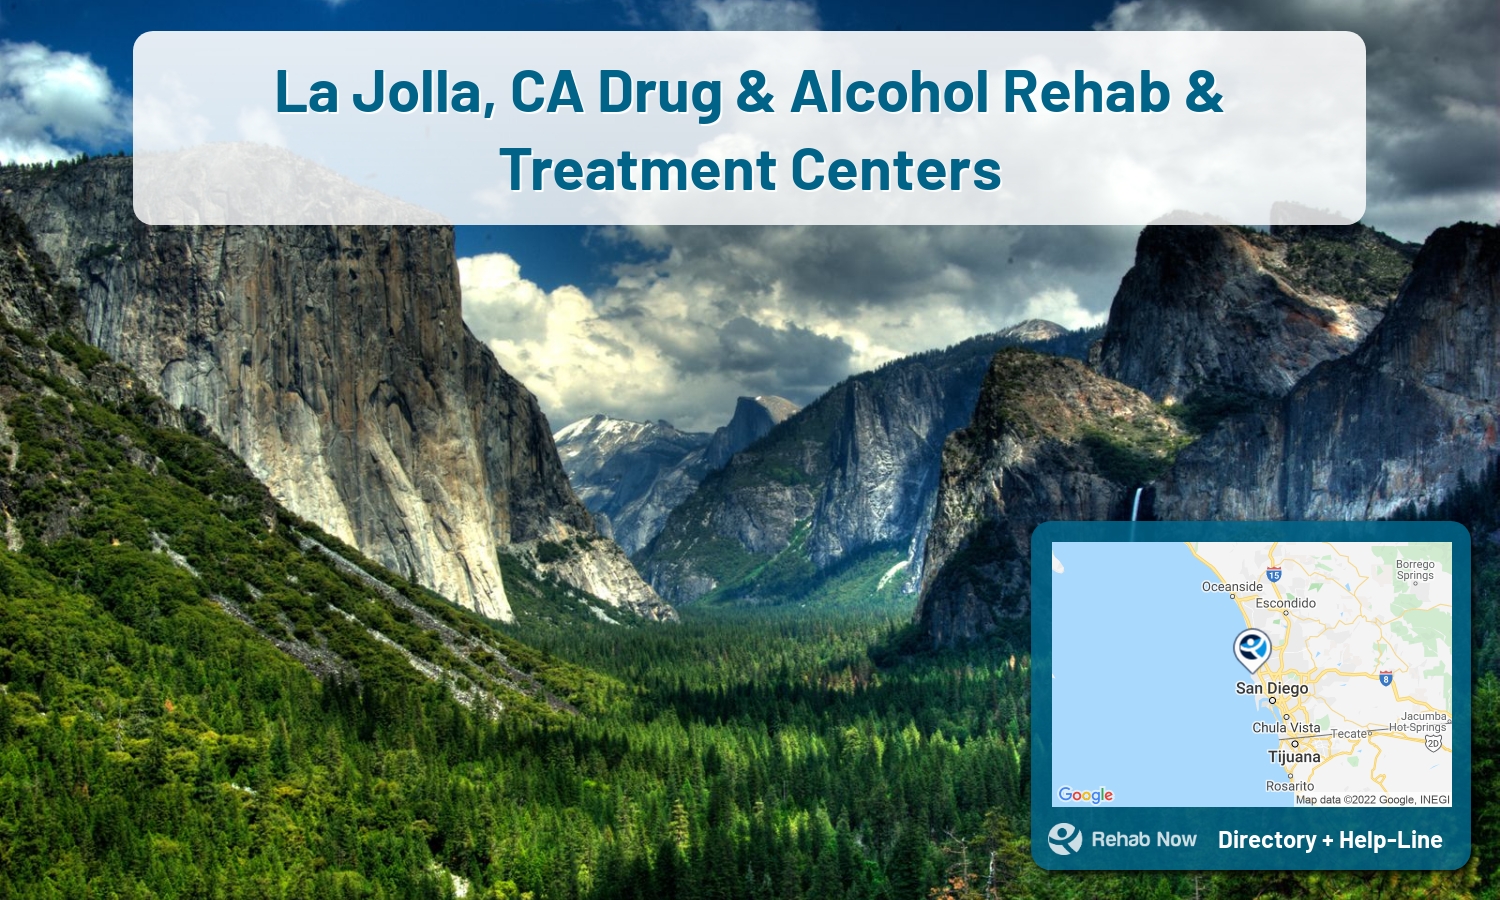 Drug rehab and alcohol treatment services nearby La Jolla, CA. Need help choosing a treatment program? Call our free hotline!